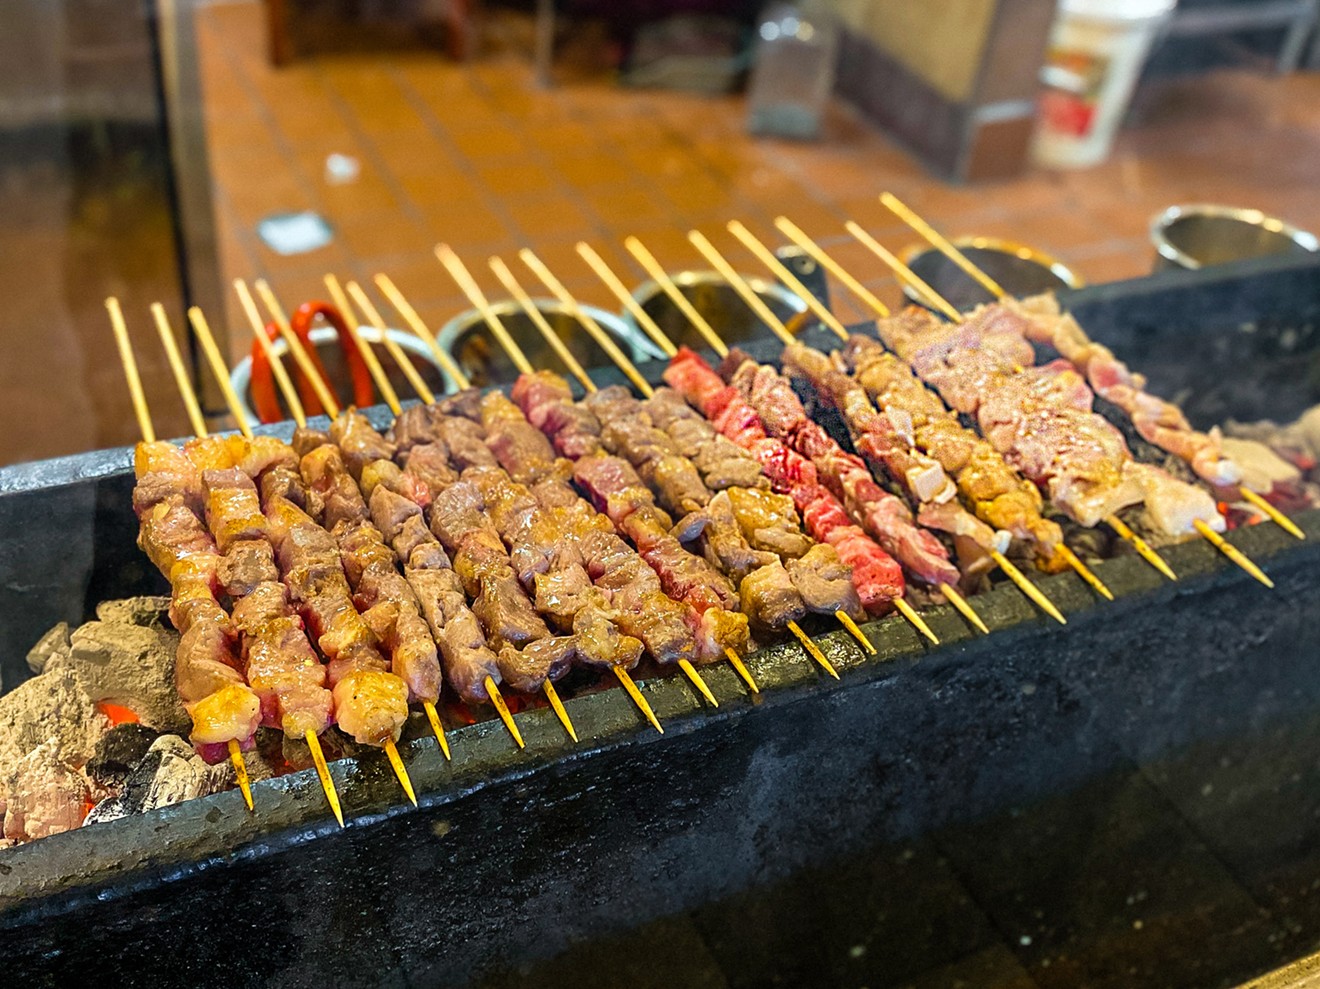 Skewers of meats and veggies get the grill treatment front and center at Fat Ni BBQ